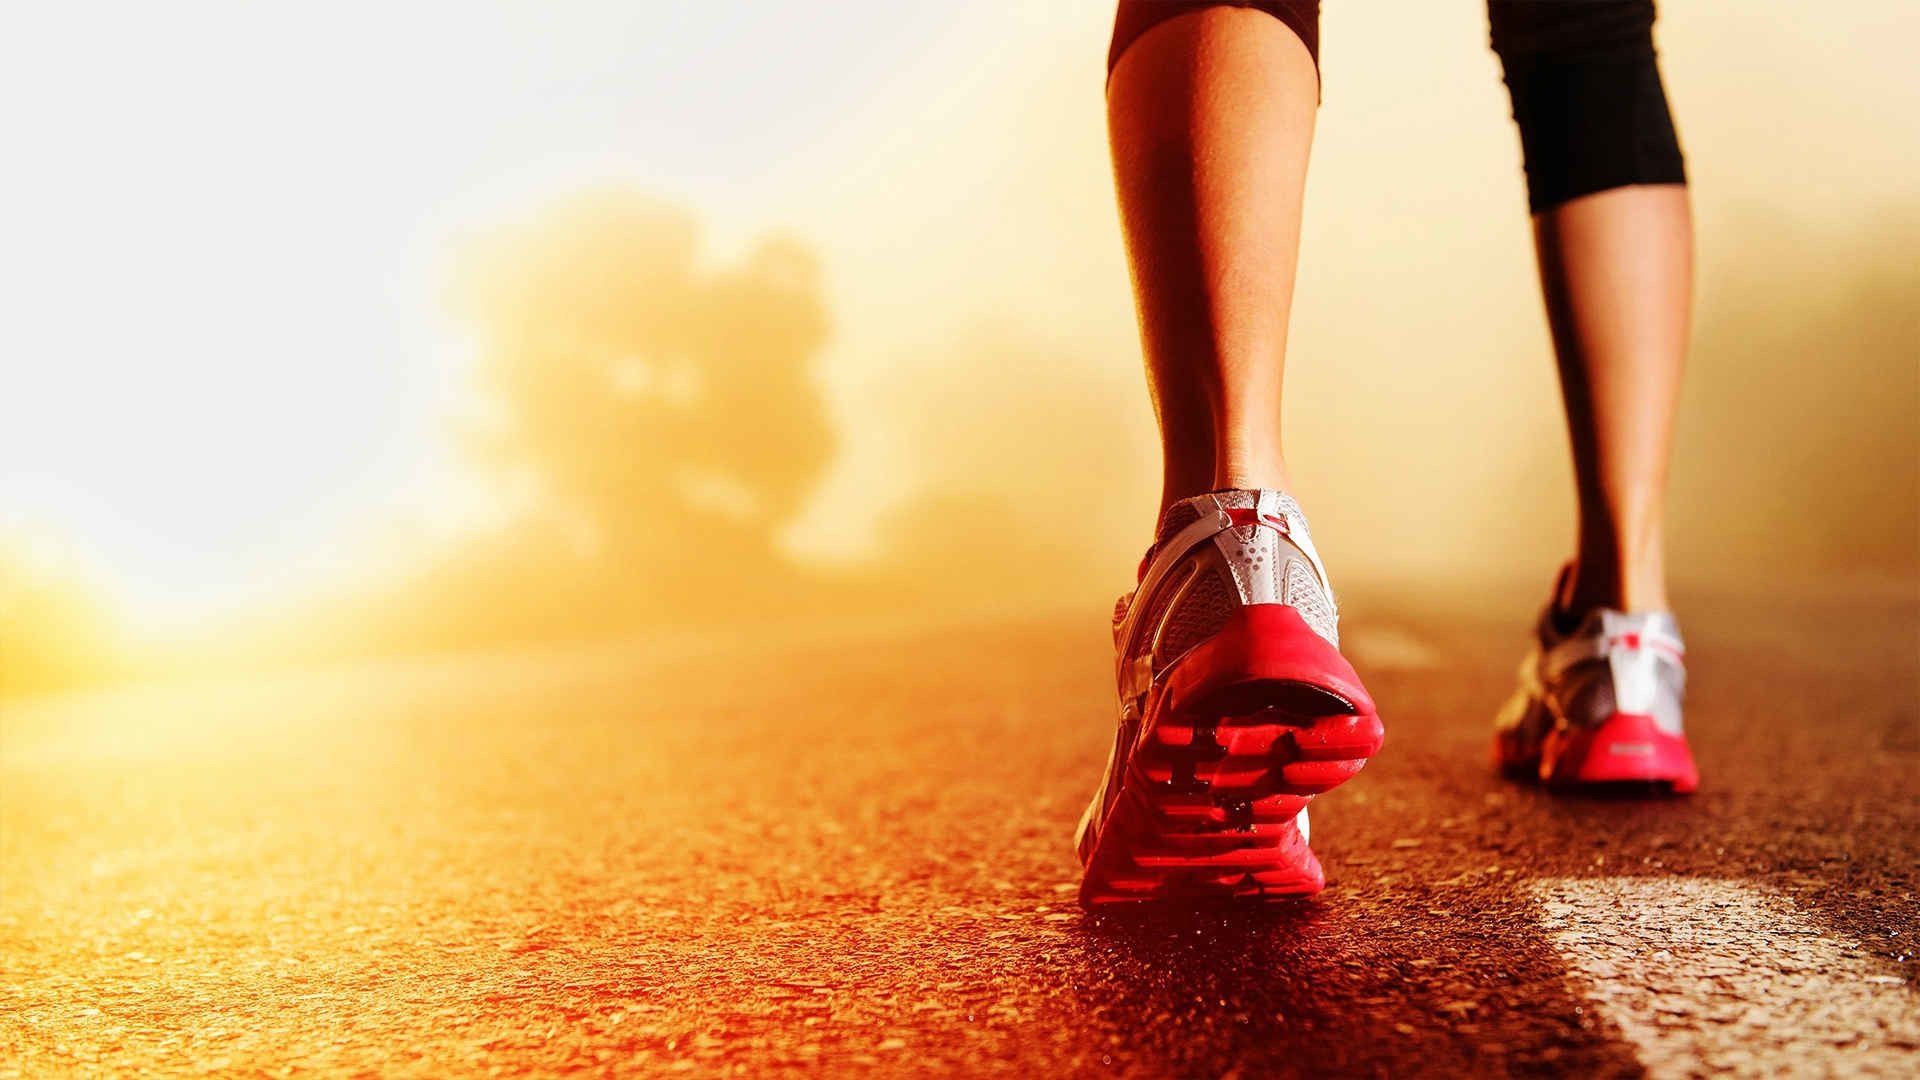 Marathon: Track running shoes, A long-distance running race, strictly one of 26 miles 385 yards (42.195 km). 1920x1080 Full HD Wallpaper.